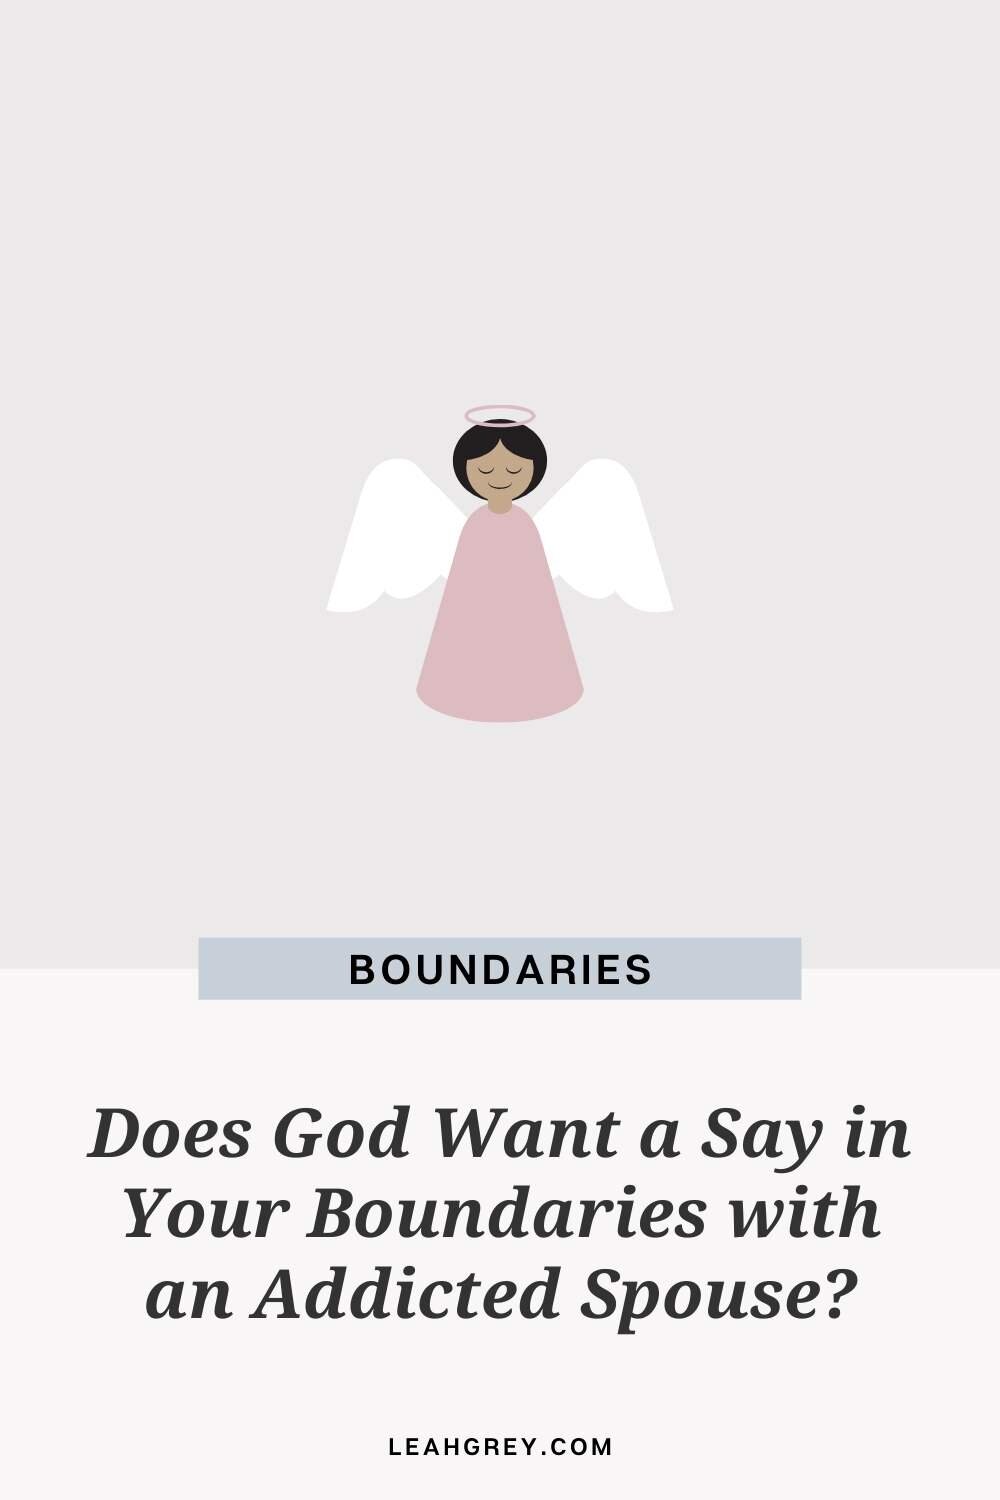 Does Faith Make a Difference in Boundaries with an Addicted Spouse? picture image